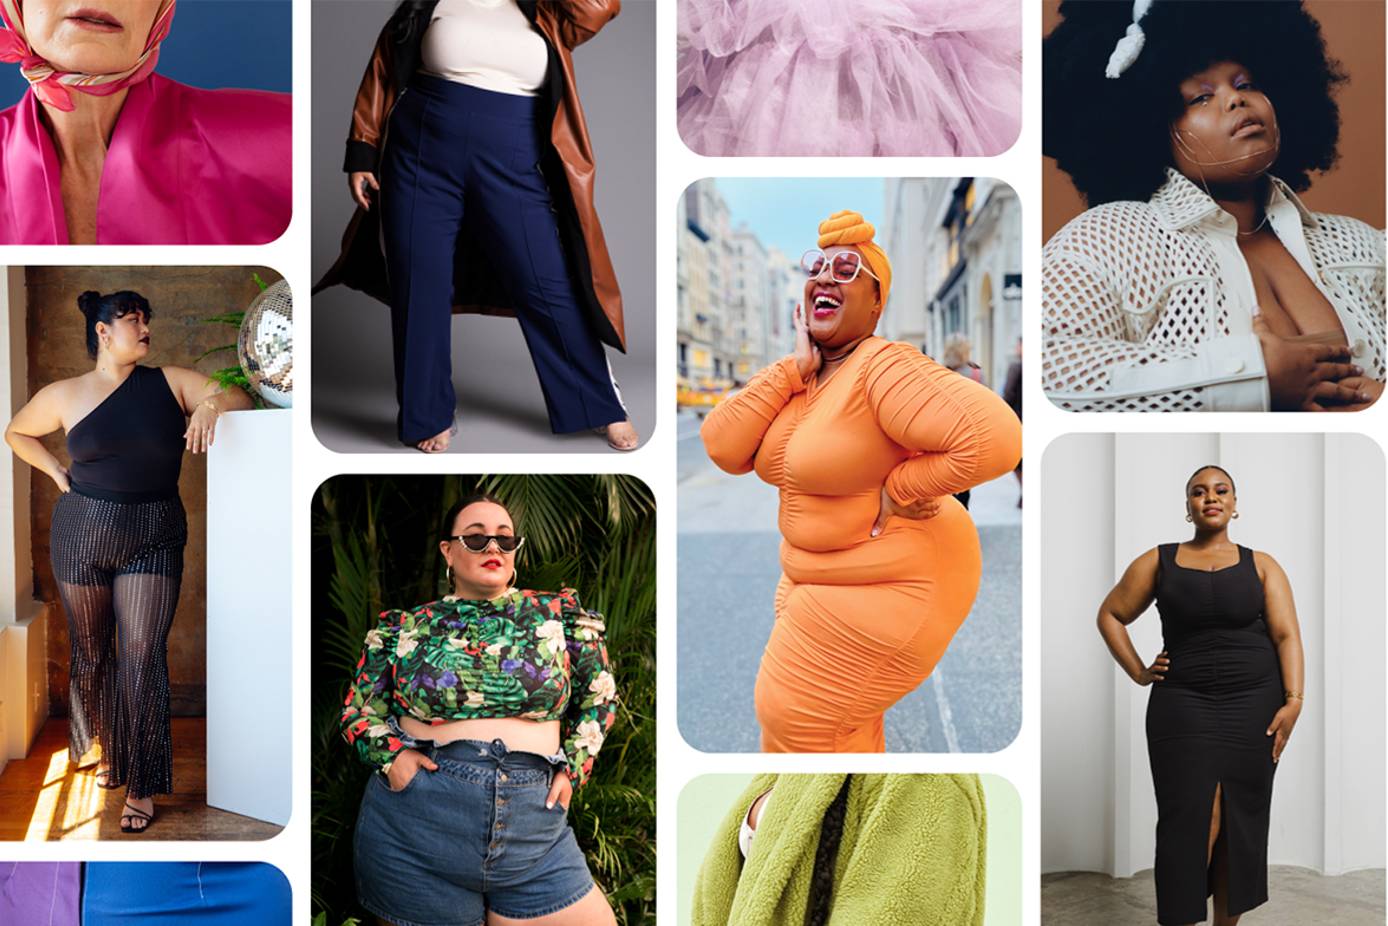 Pinterest and Shapermint prove it pays to be body positive, Advertising